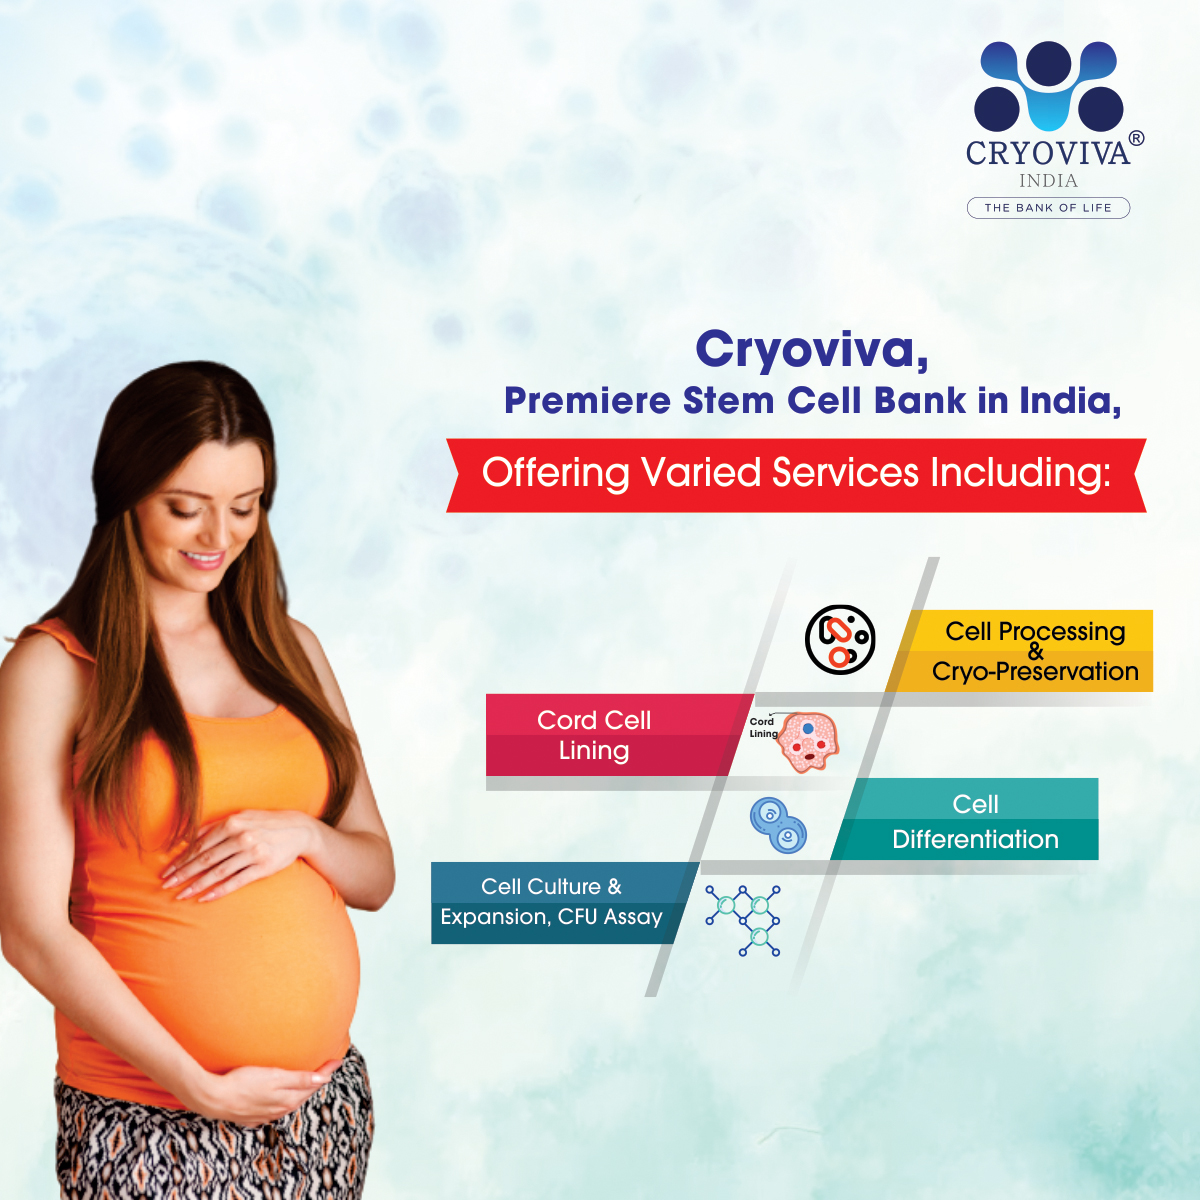 Cryoviva Biotech Private Limited provides its customers with the choice of Family Banking or Social Banking. We assure that the #cordblood stem cell collecting method is painless, risk-free, and entirely sanitary.
#stemcellbanking #cordbloodbanking #cryovivaindia #stemcellstorage